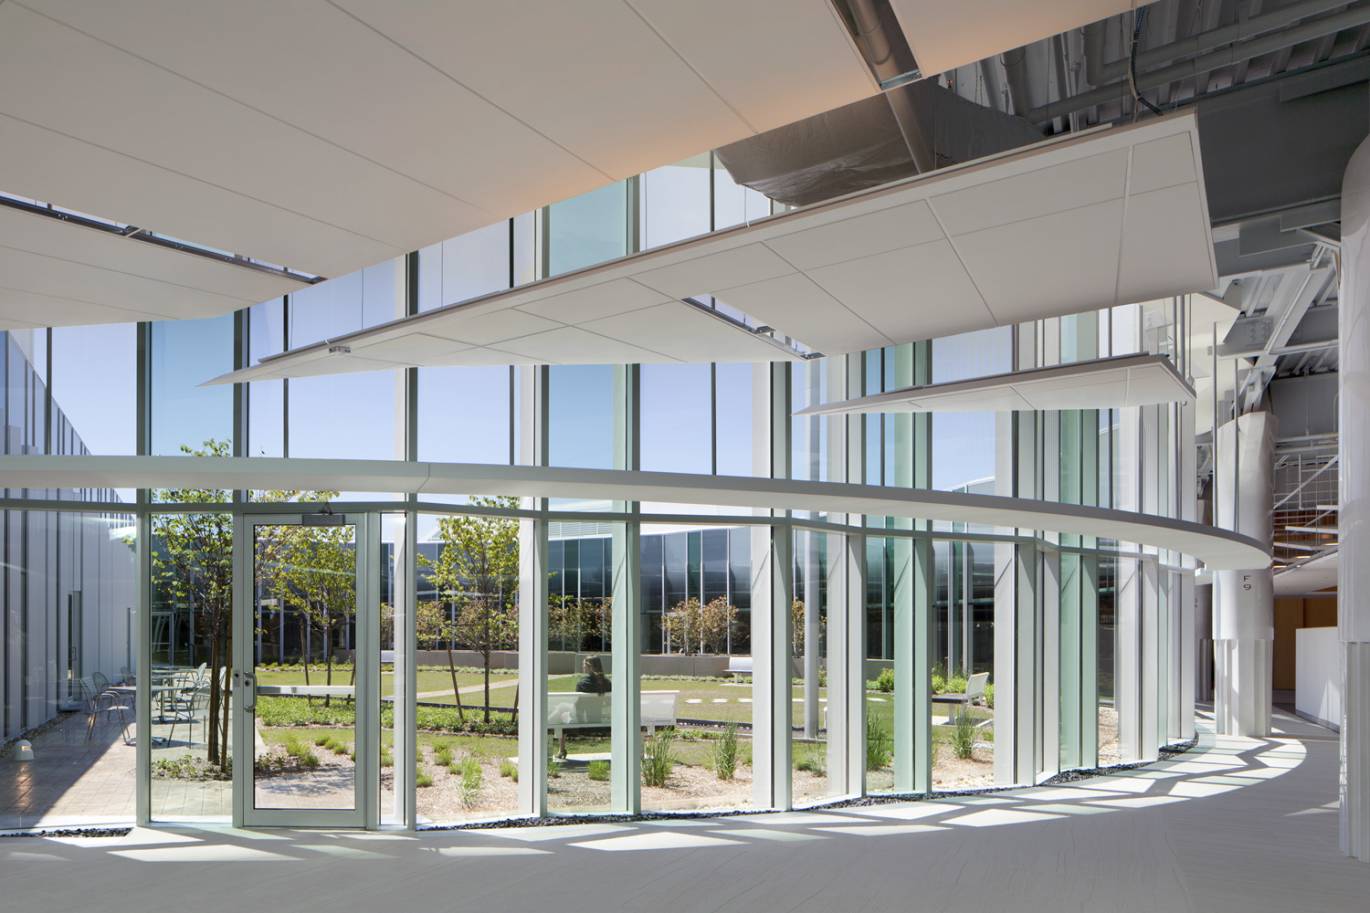 Courtyard in context: giving workspace light & landscape views